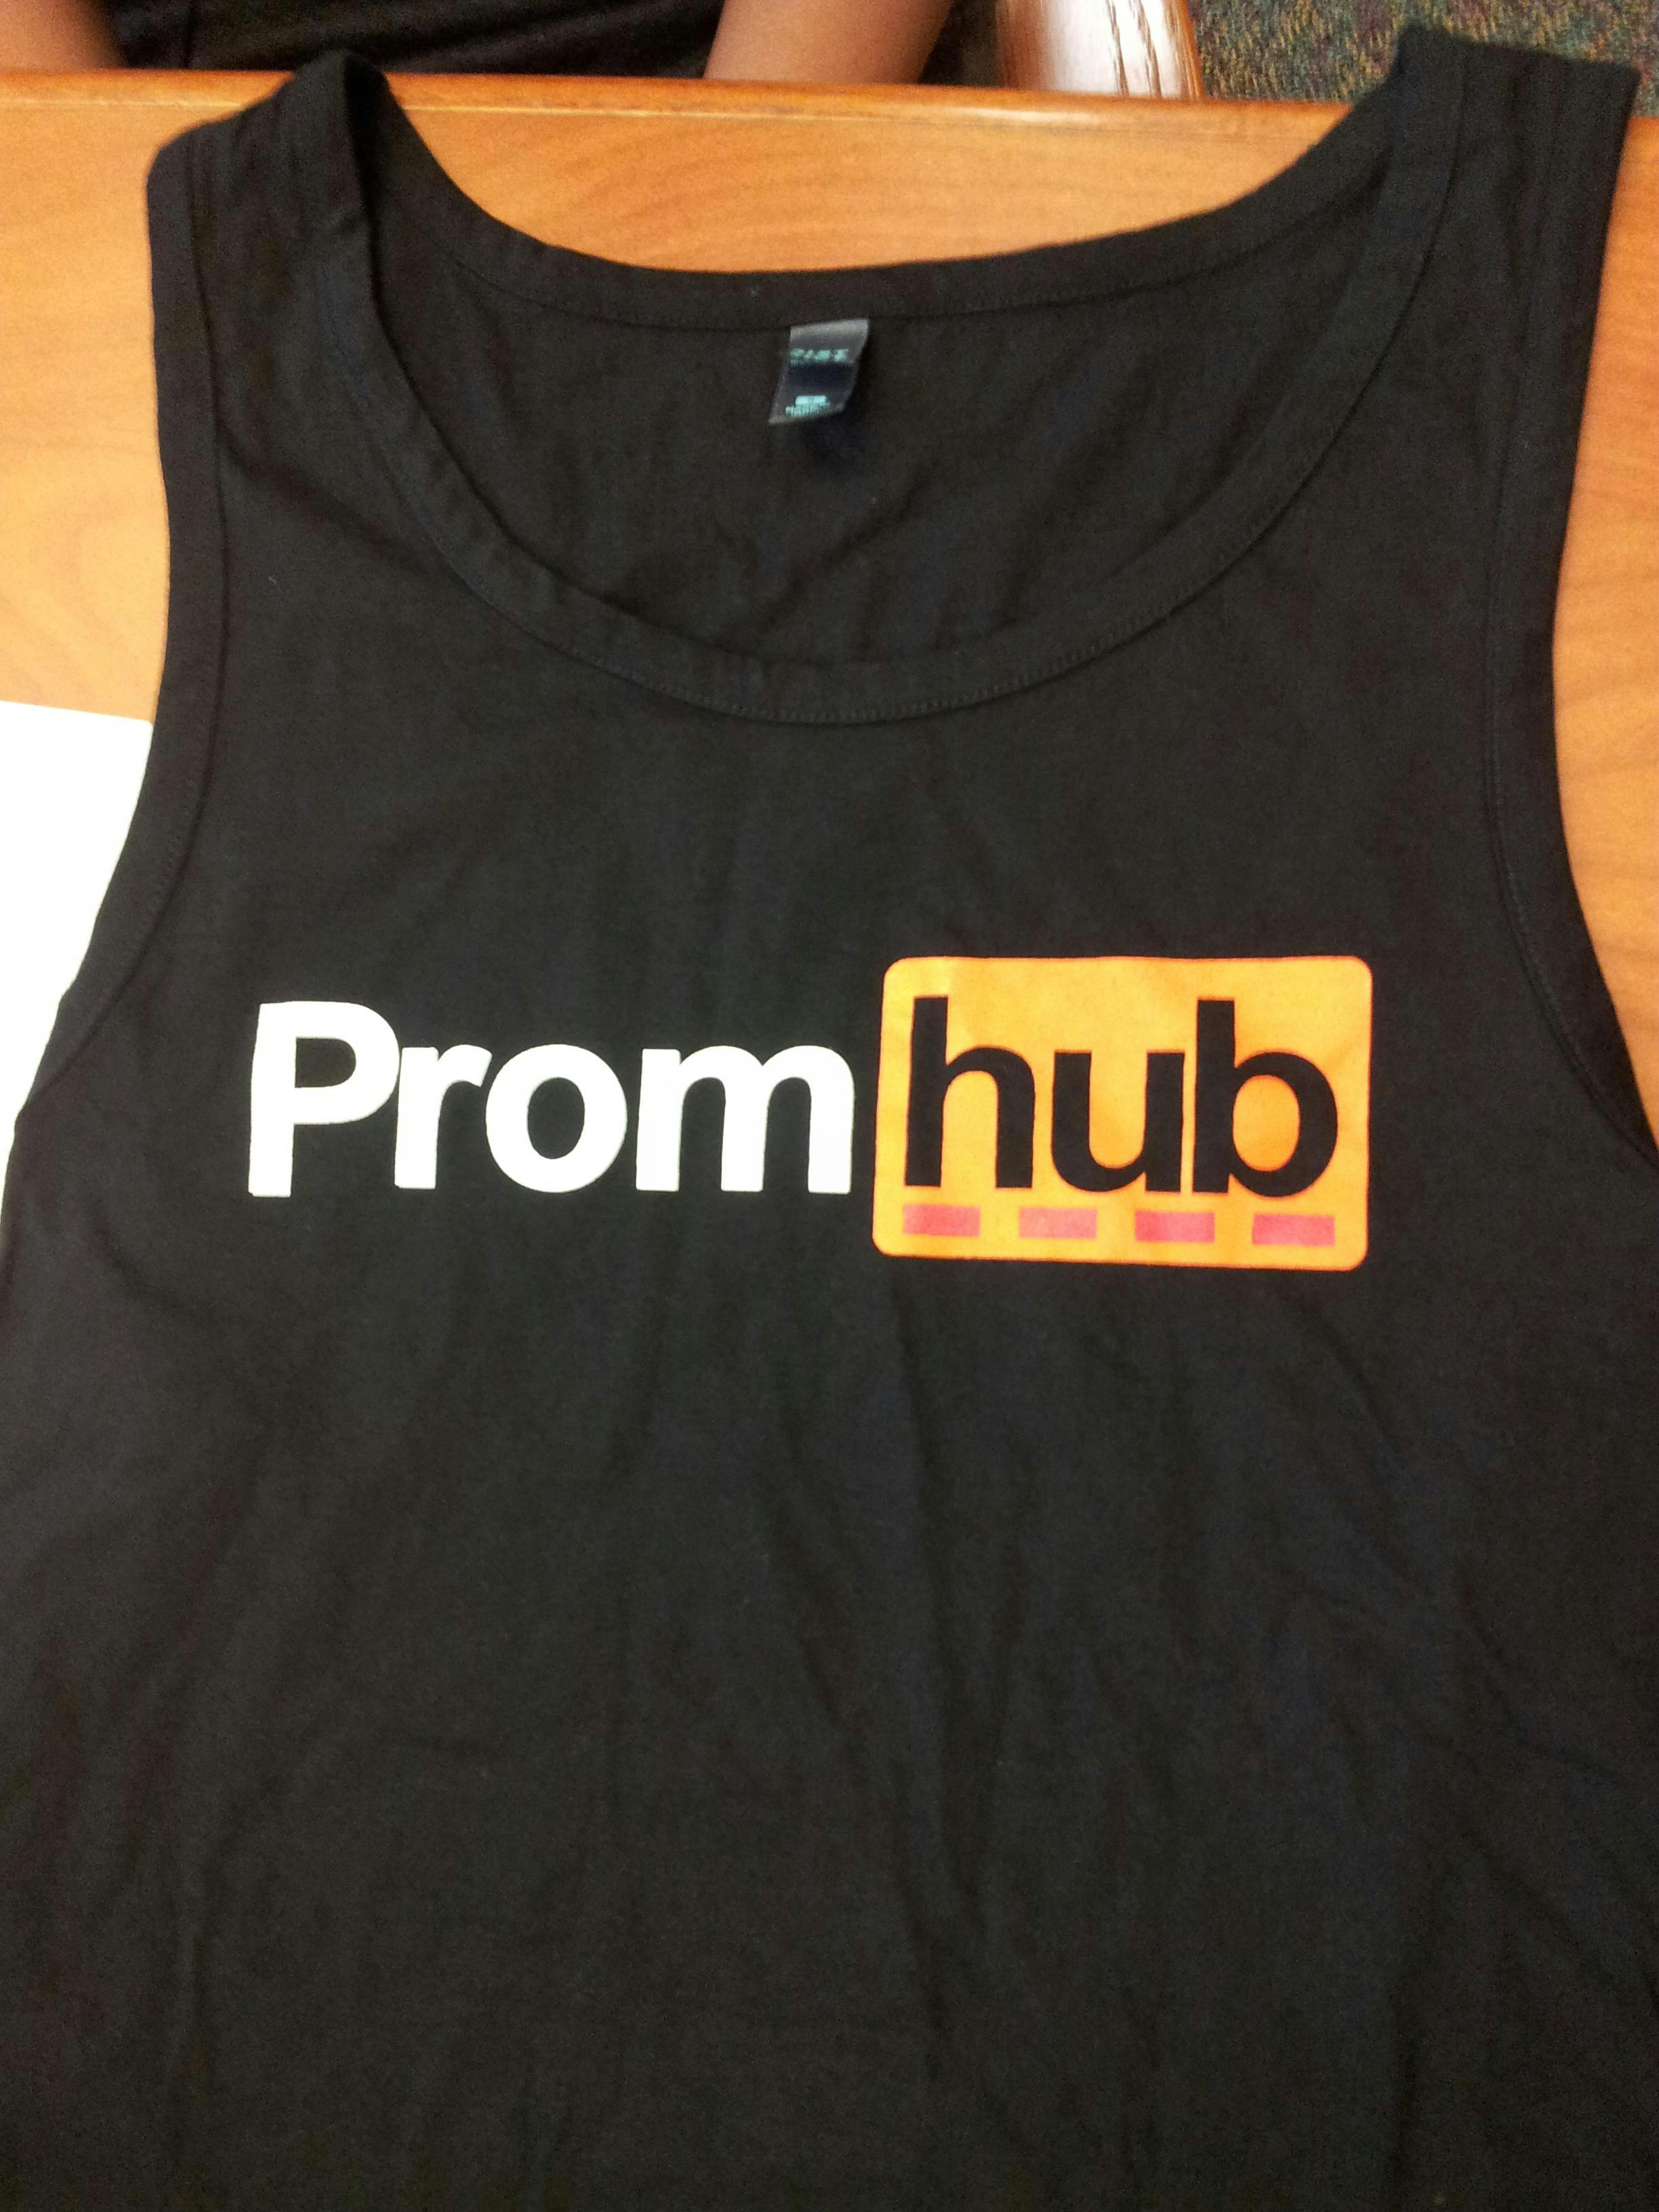 Promhub - This high school's prom shirt was inspired by a huge porn site - The Daily  Dot